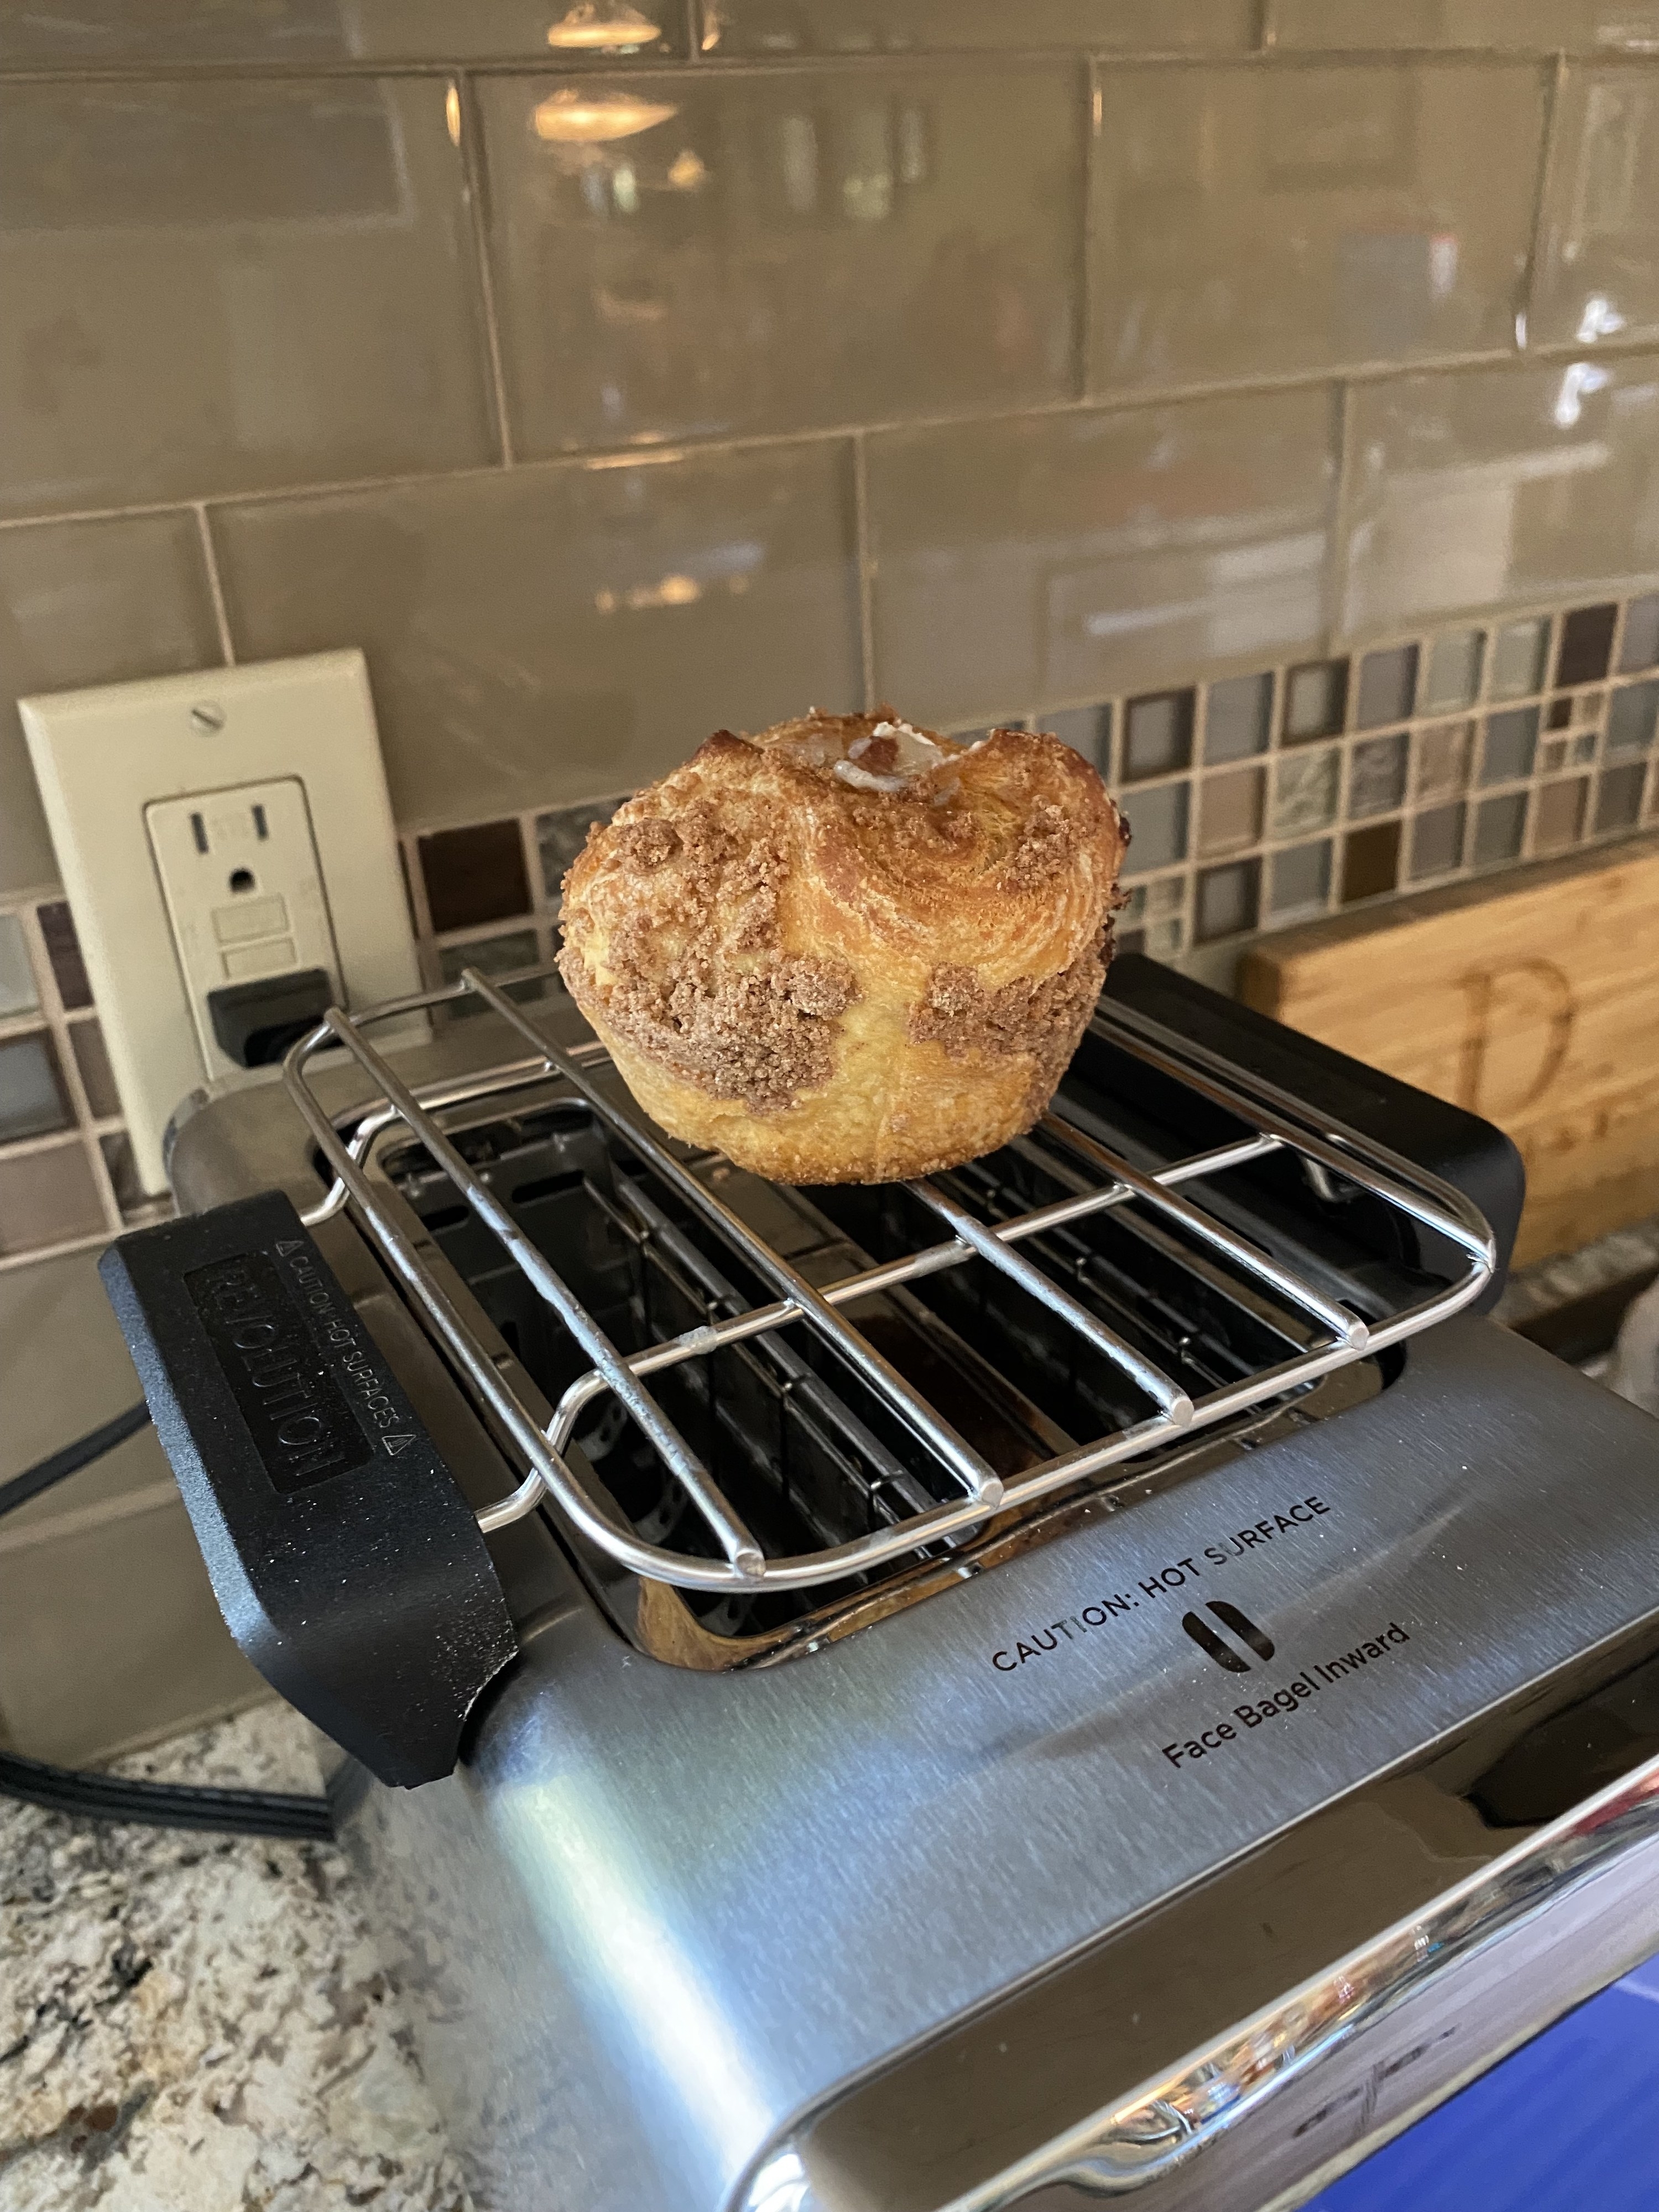 5 Things to Know About the Revolution Cooking Touchscreen Toaster